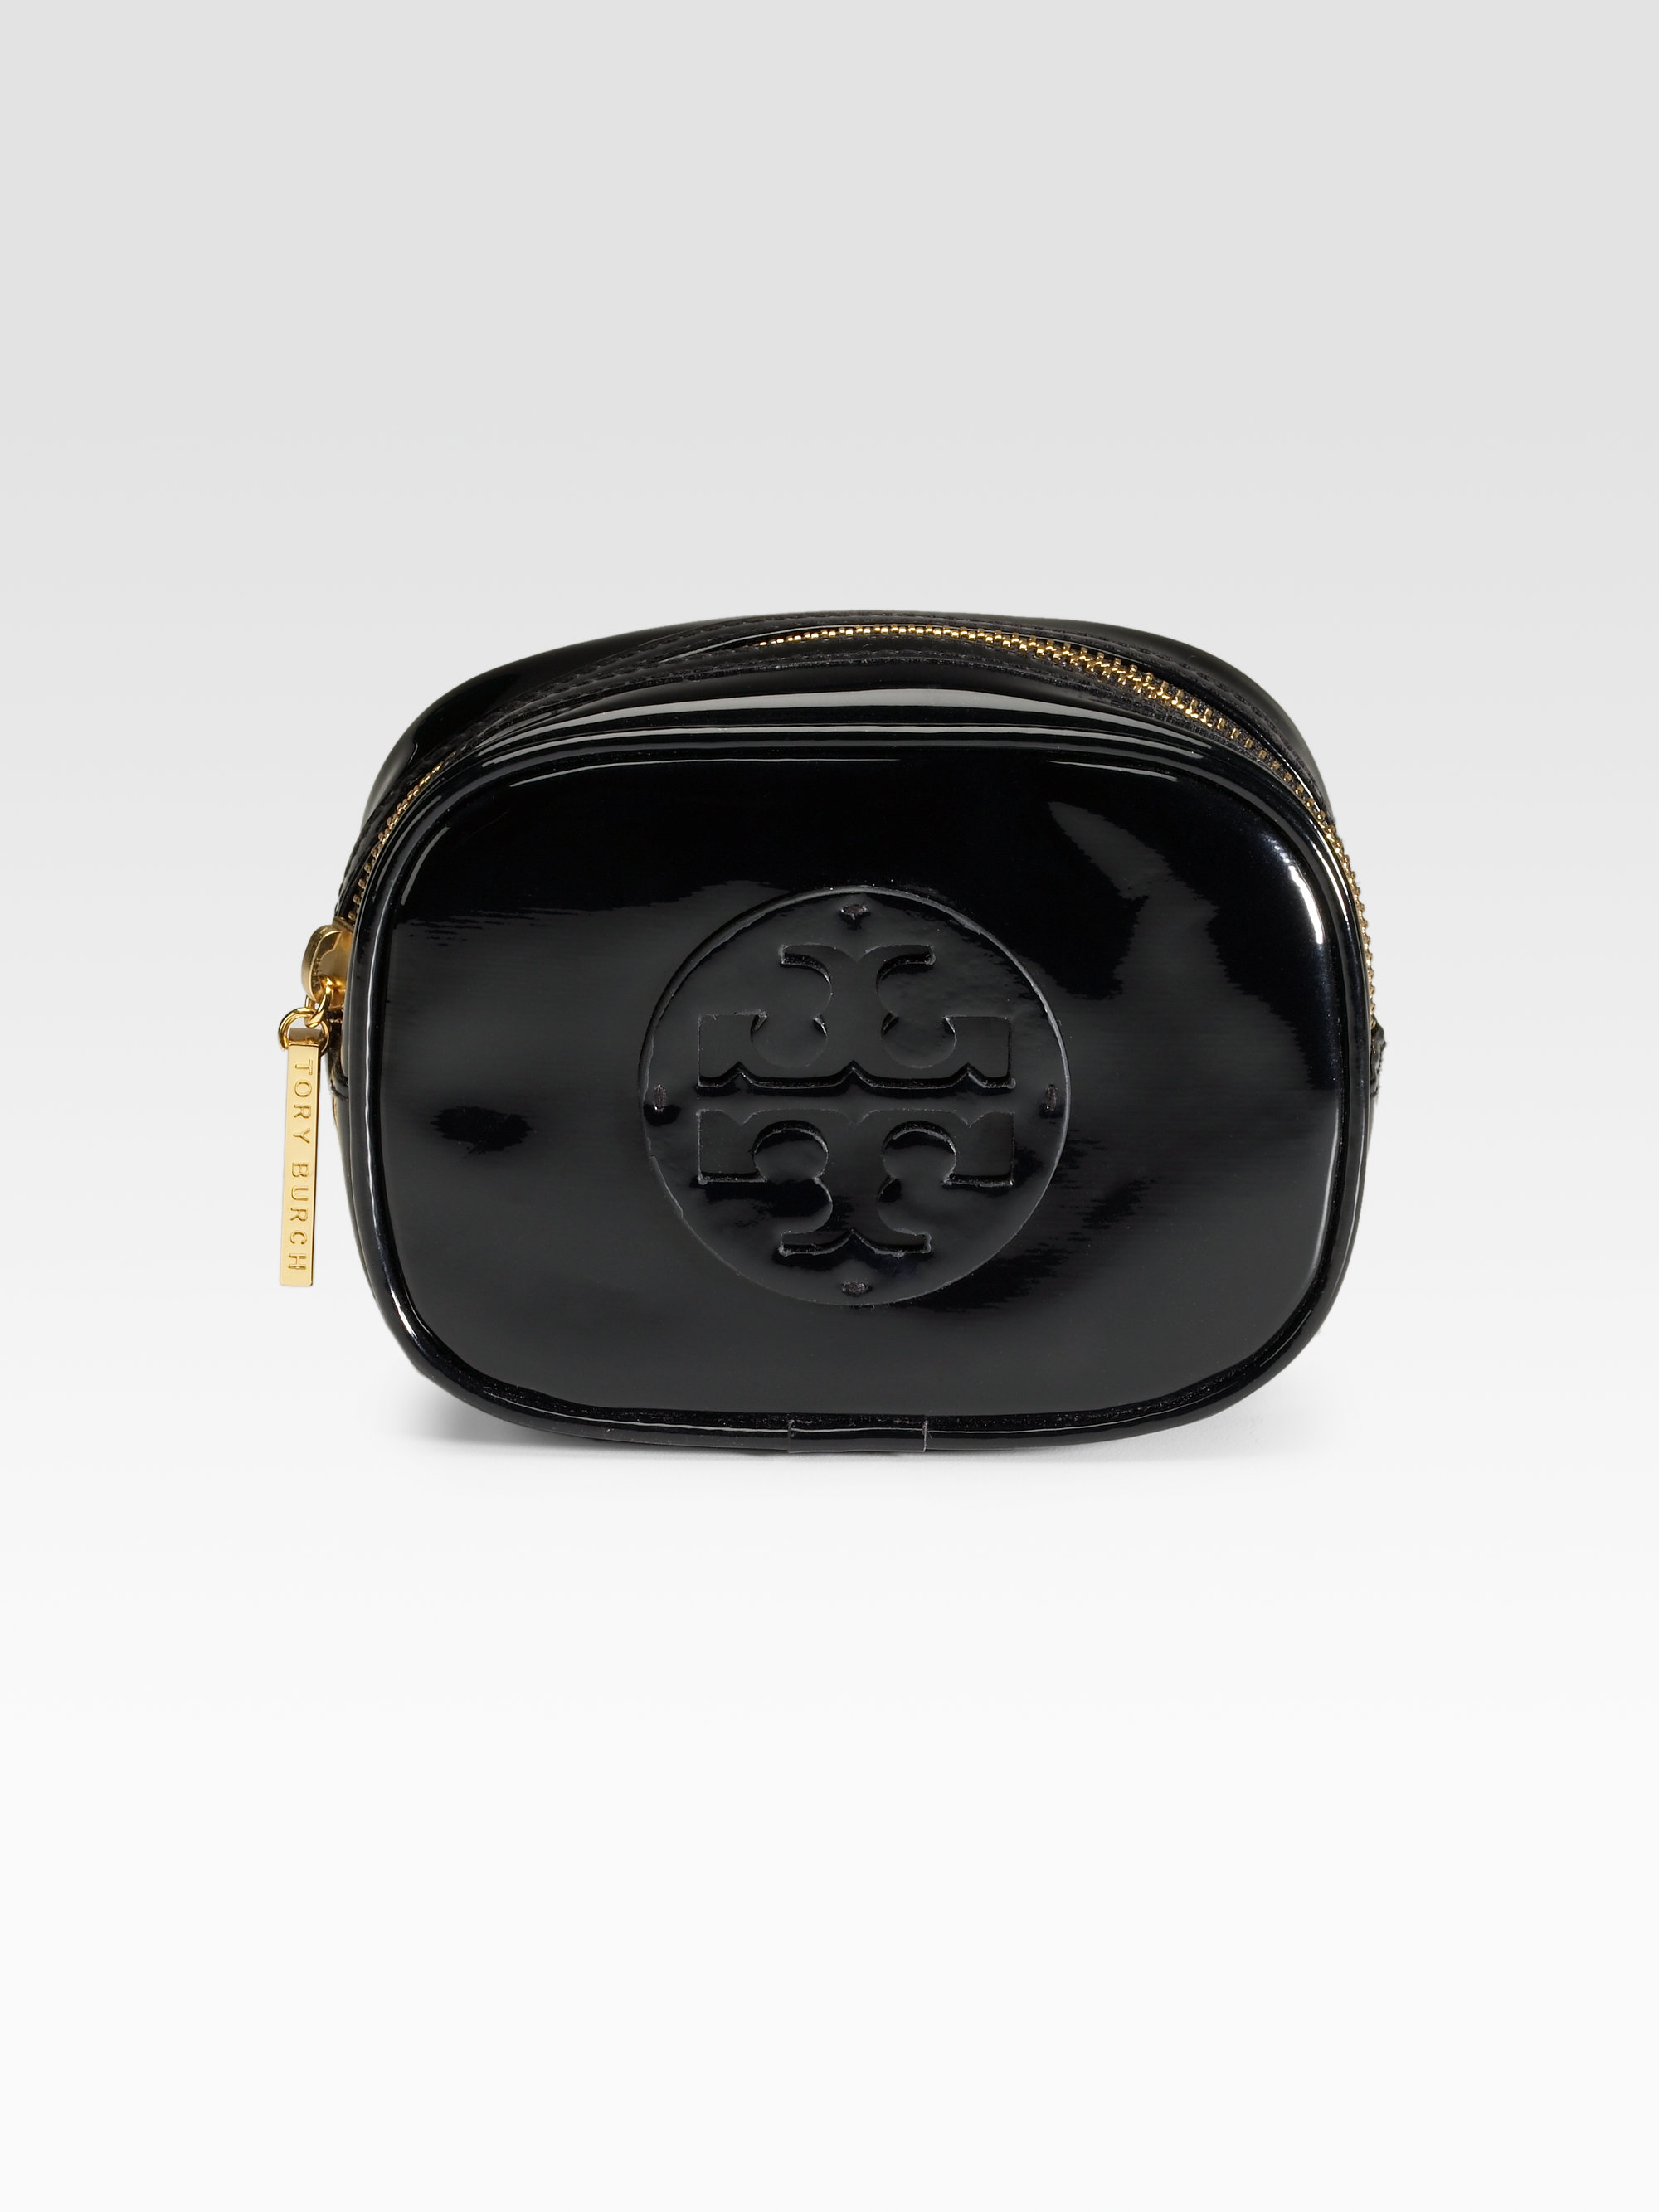 Tory Burch Patent Leather Cosmetic Bag in Black | Lyst